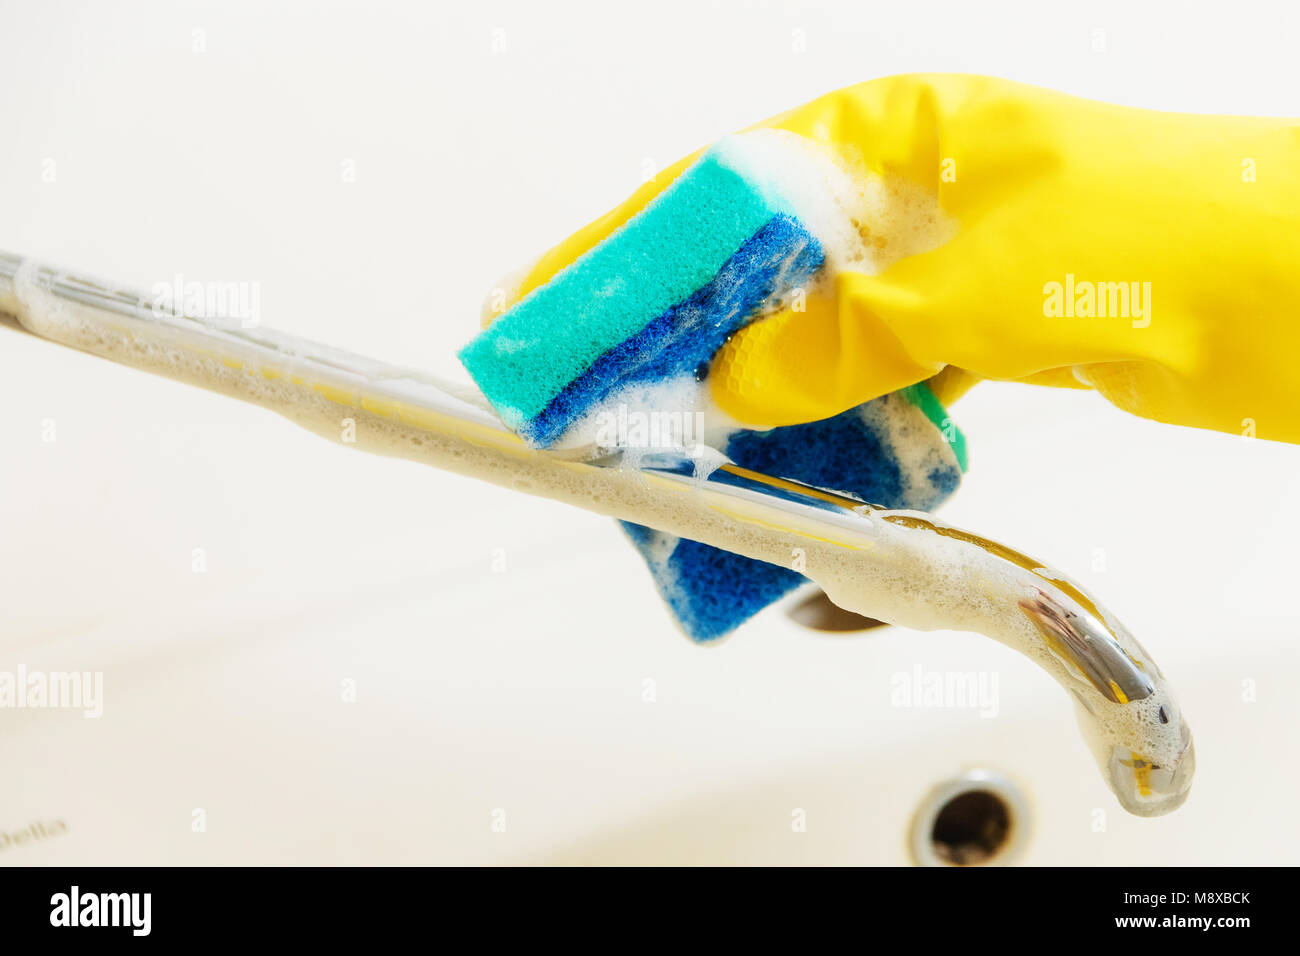 Cleaning Bathroom Faucet with Detergent in Yellow Rubber Gloves with Blue Sponge - Housework, Spring Cleaning Concept Stock Photo